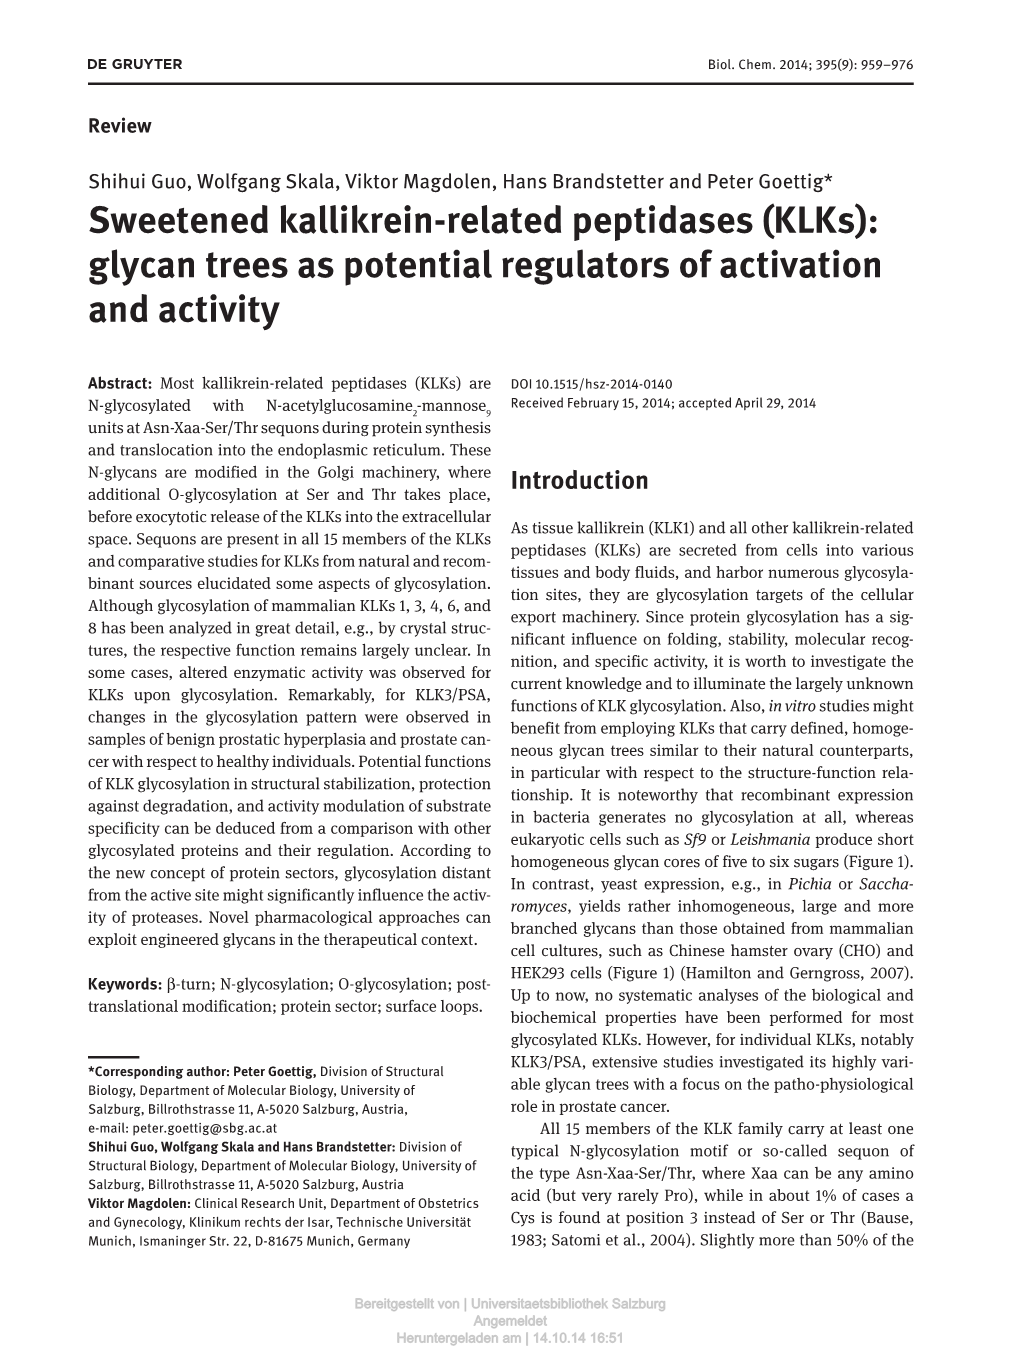 Sweetened Kallikrein-Related Peptidases (Klks): Glycan Trees As Potential Regulators of Activation and Activity